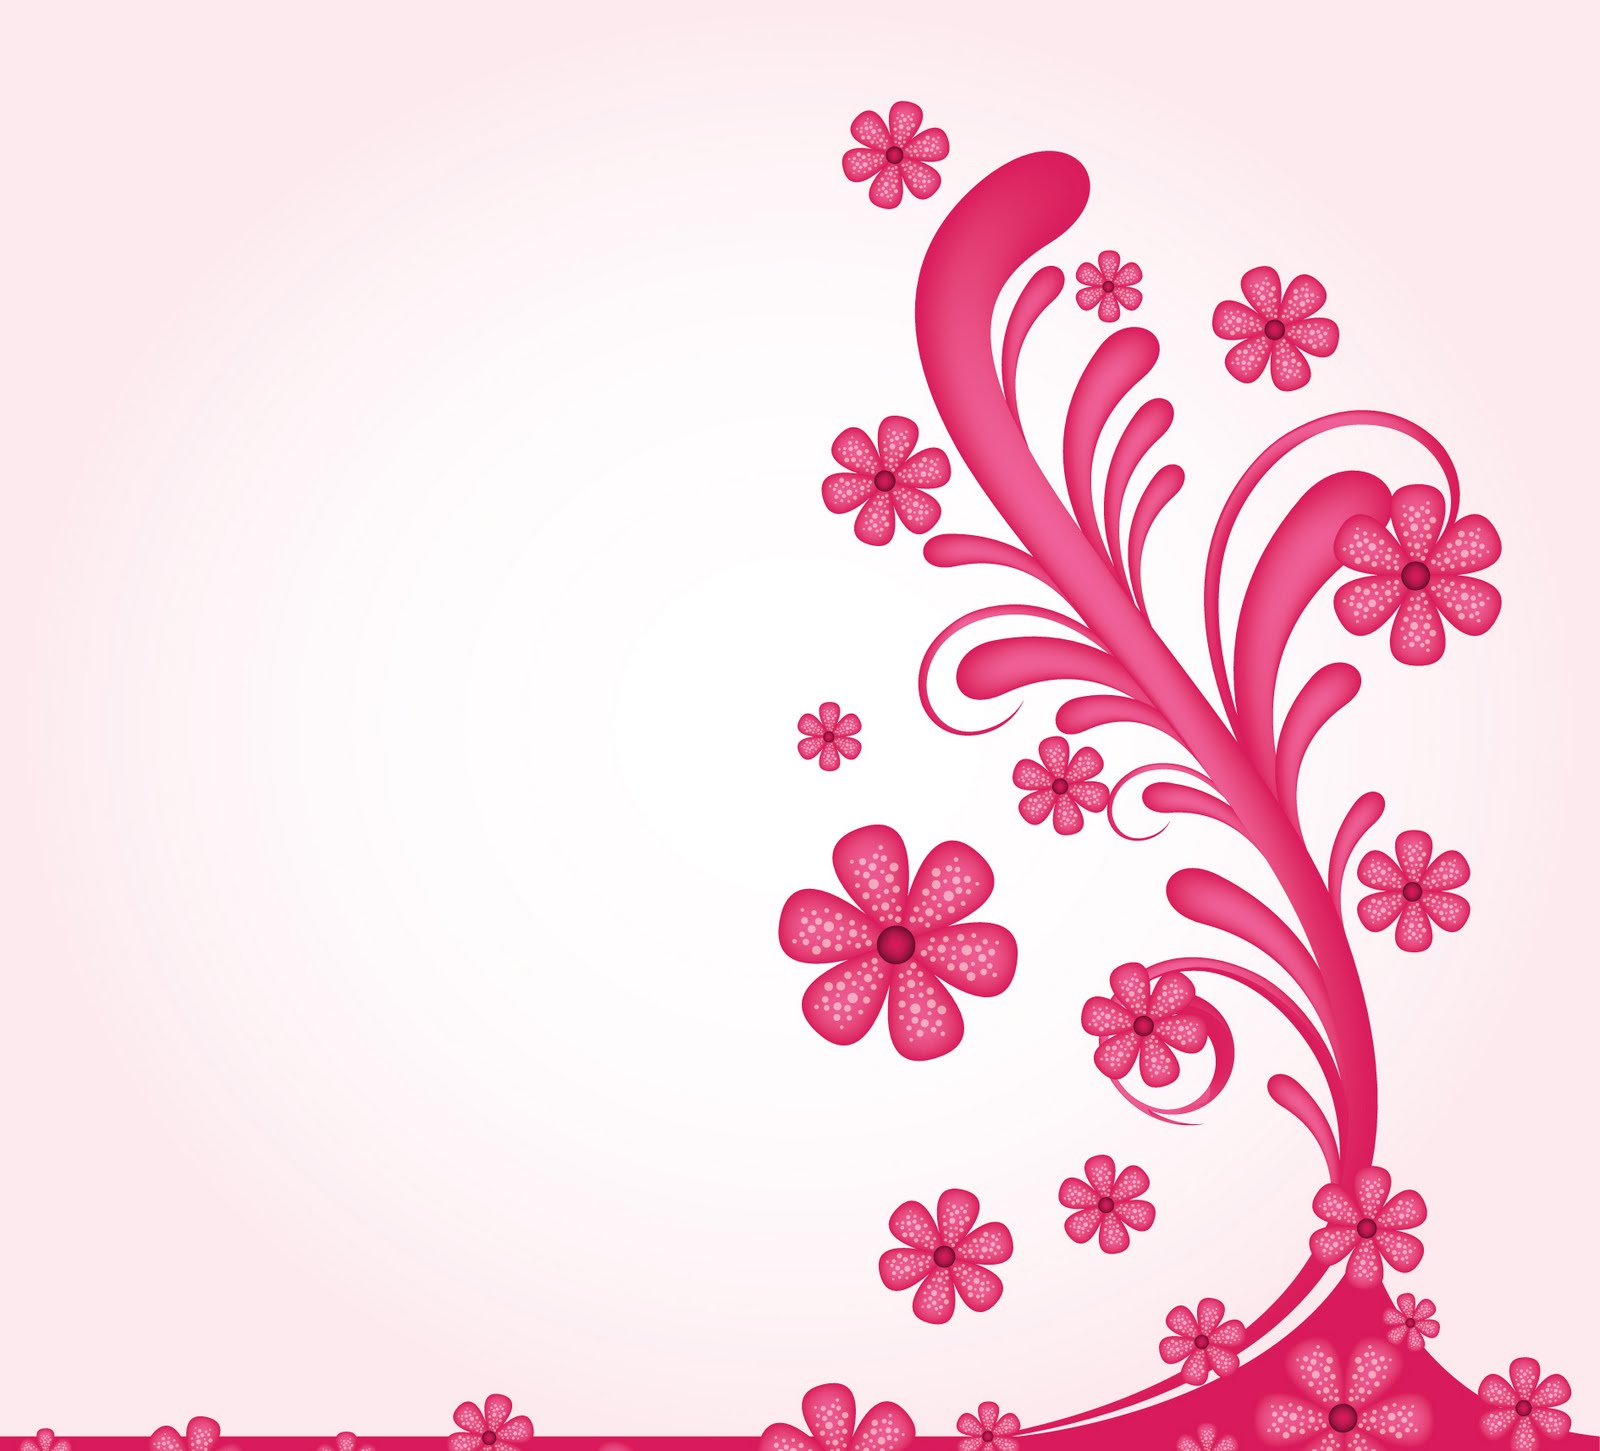 Free Floral Pink Decoration Backgrounds For PowerPoint - Flower PPT ...